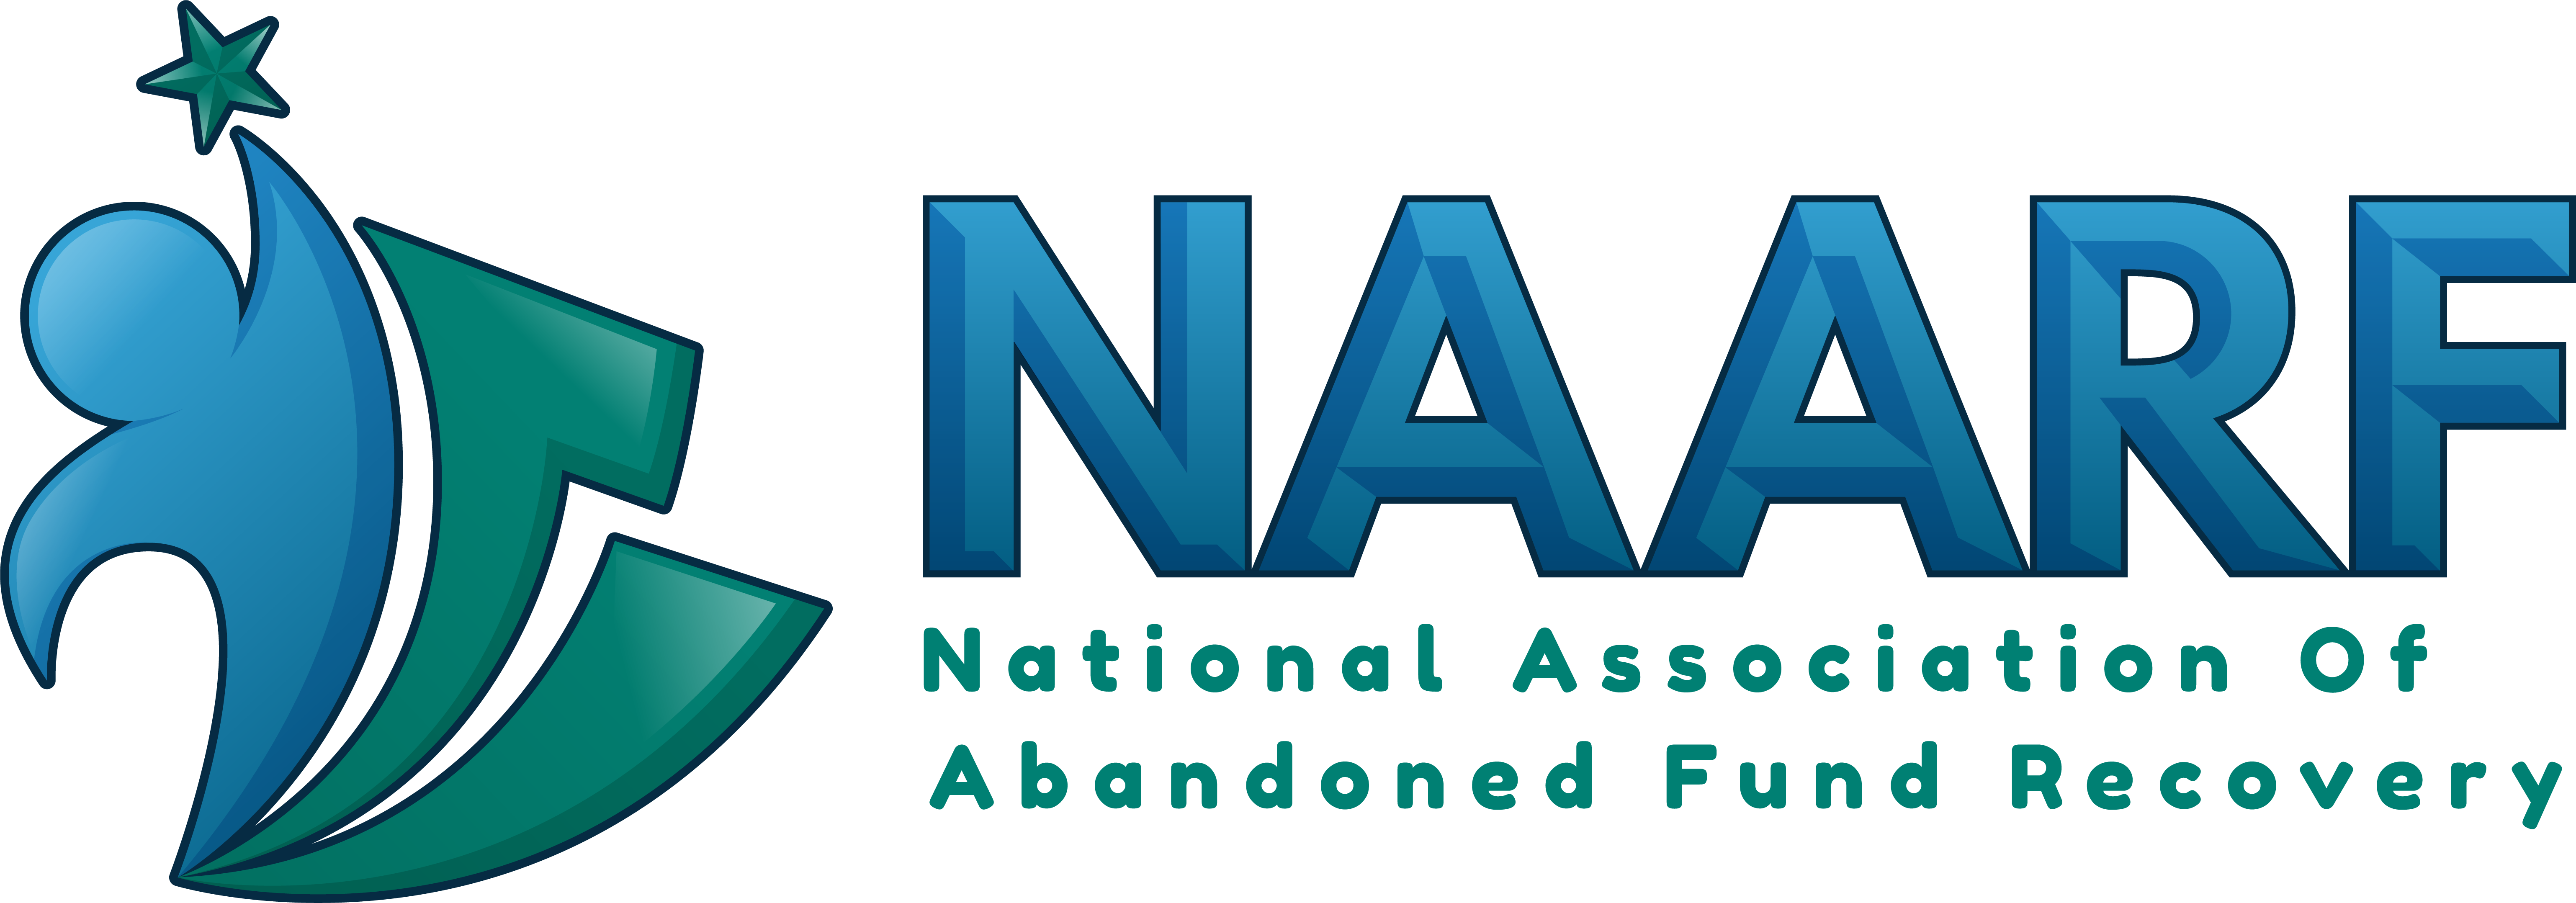 National Association of Abandoned Funds Recovery NAAFR.com